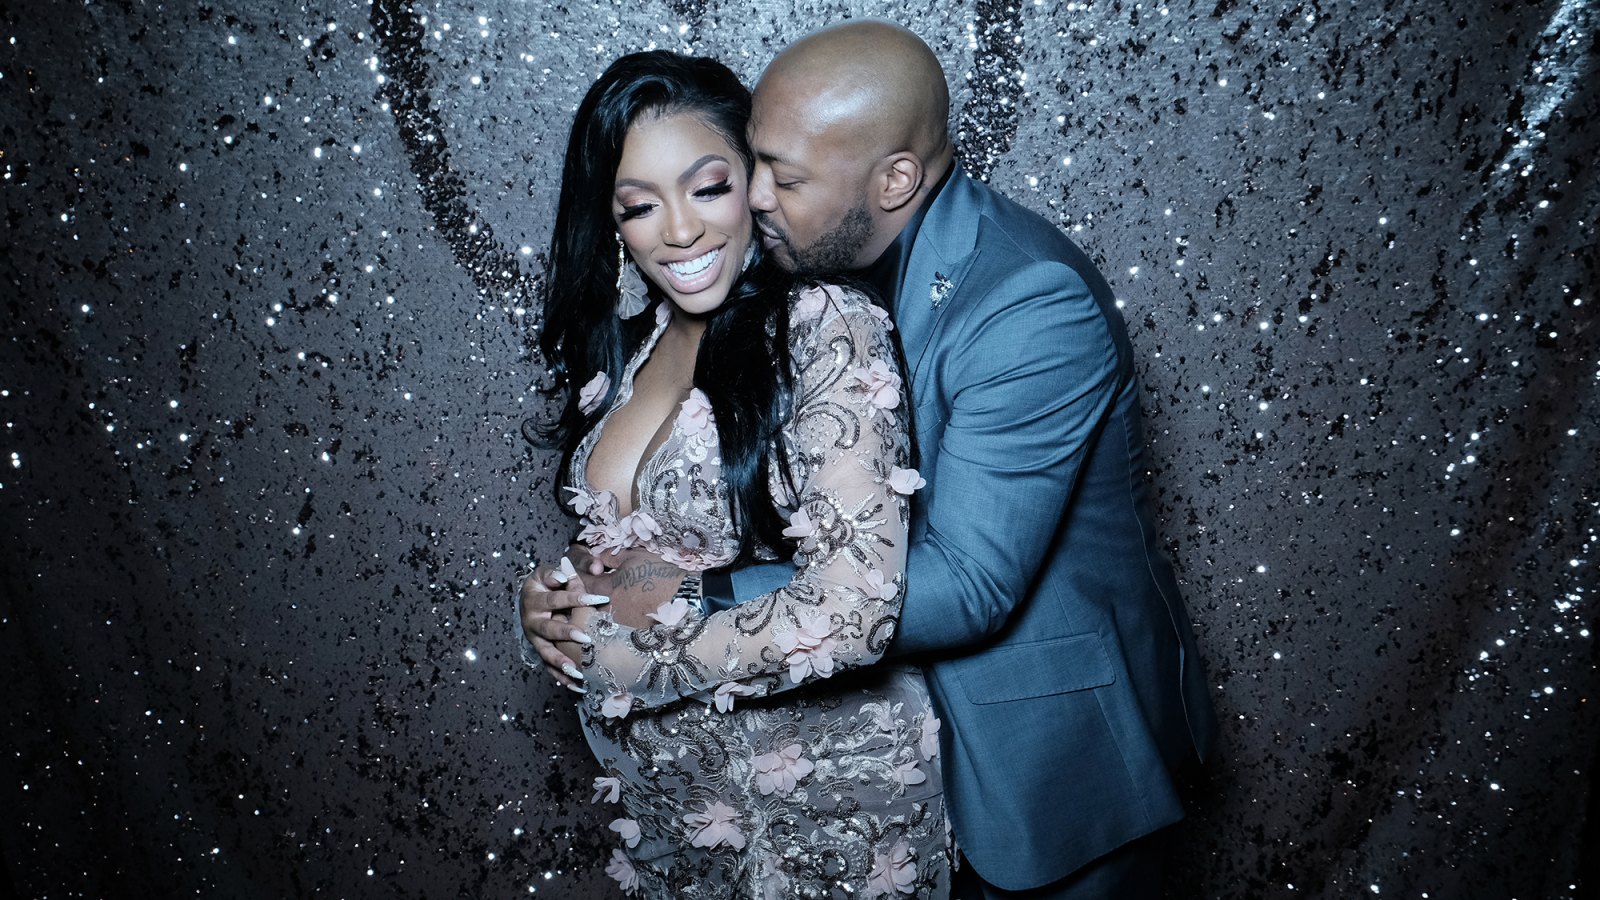 Porsha Williams Says She’s Marrying Dennis McKinley ’Next Year’ After Re-Engagement